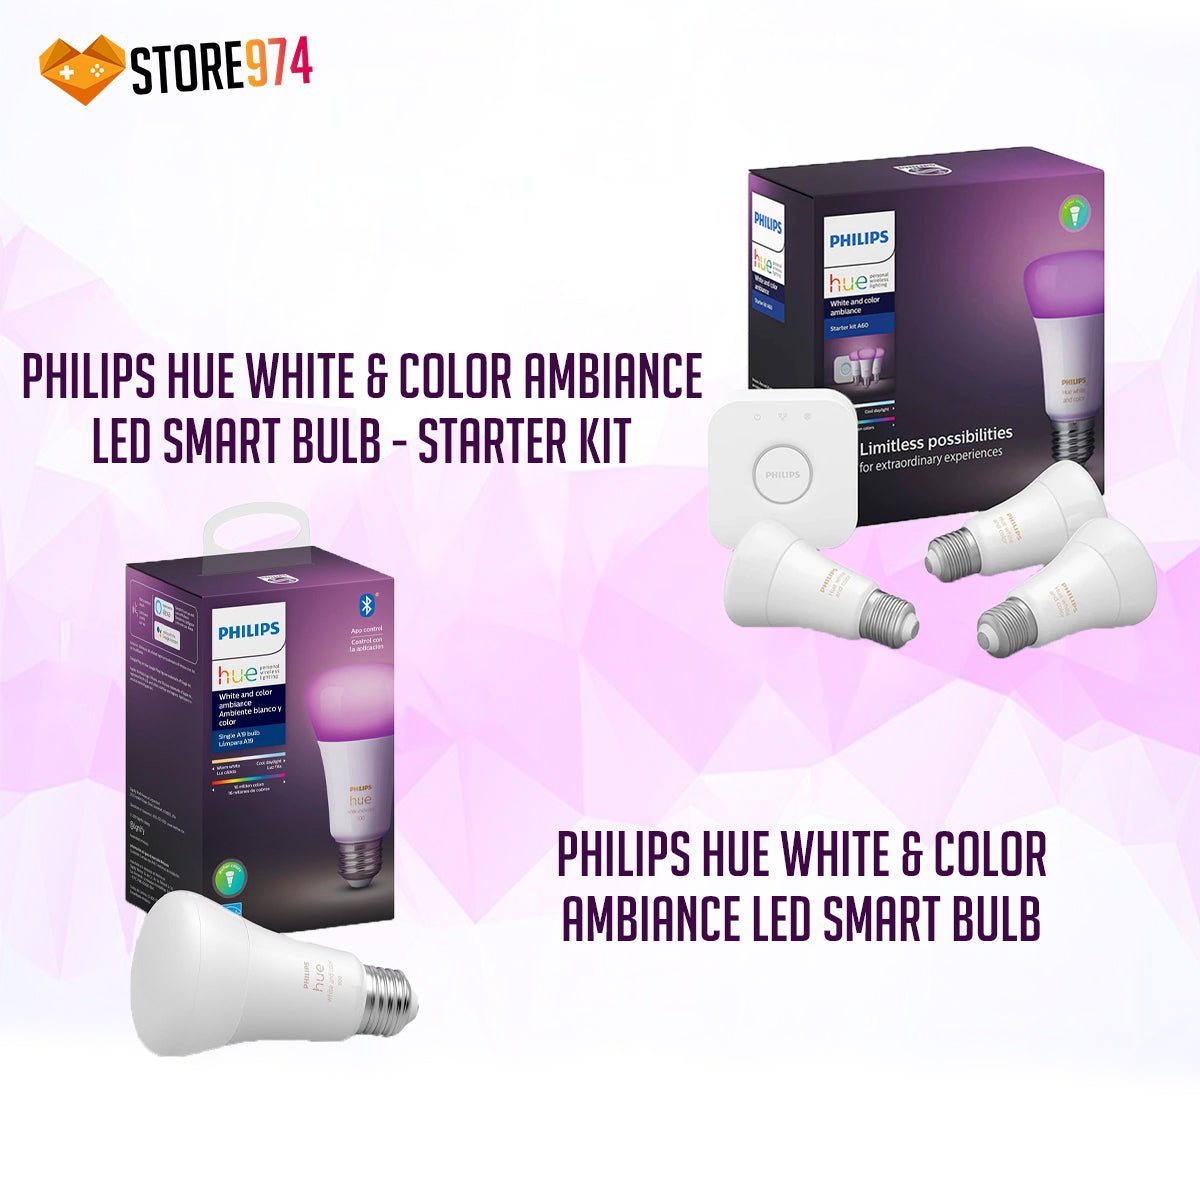 Philips HUE White & Color Ambiance LED Smart Bulb - Starter Kit + White & Color Ambiance LED Smart Bulb - Store 974 | ستور ٩٧٤